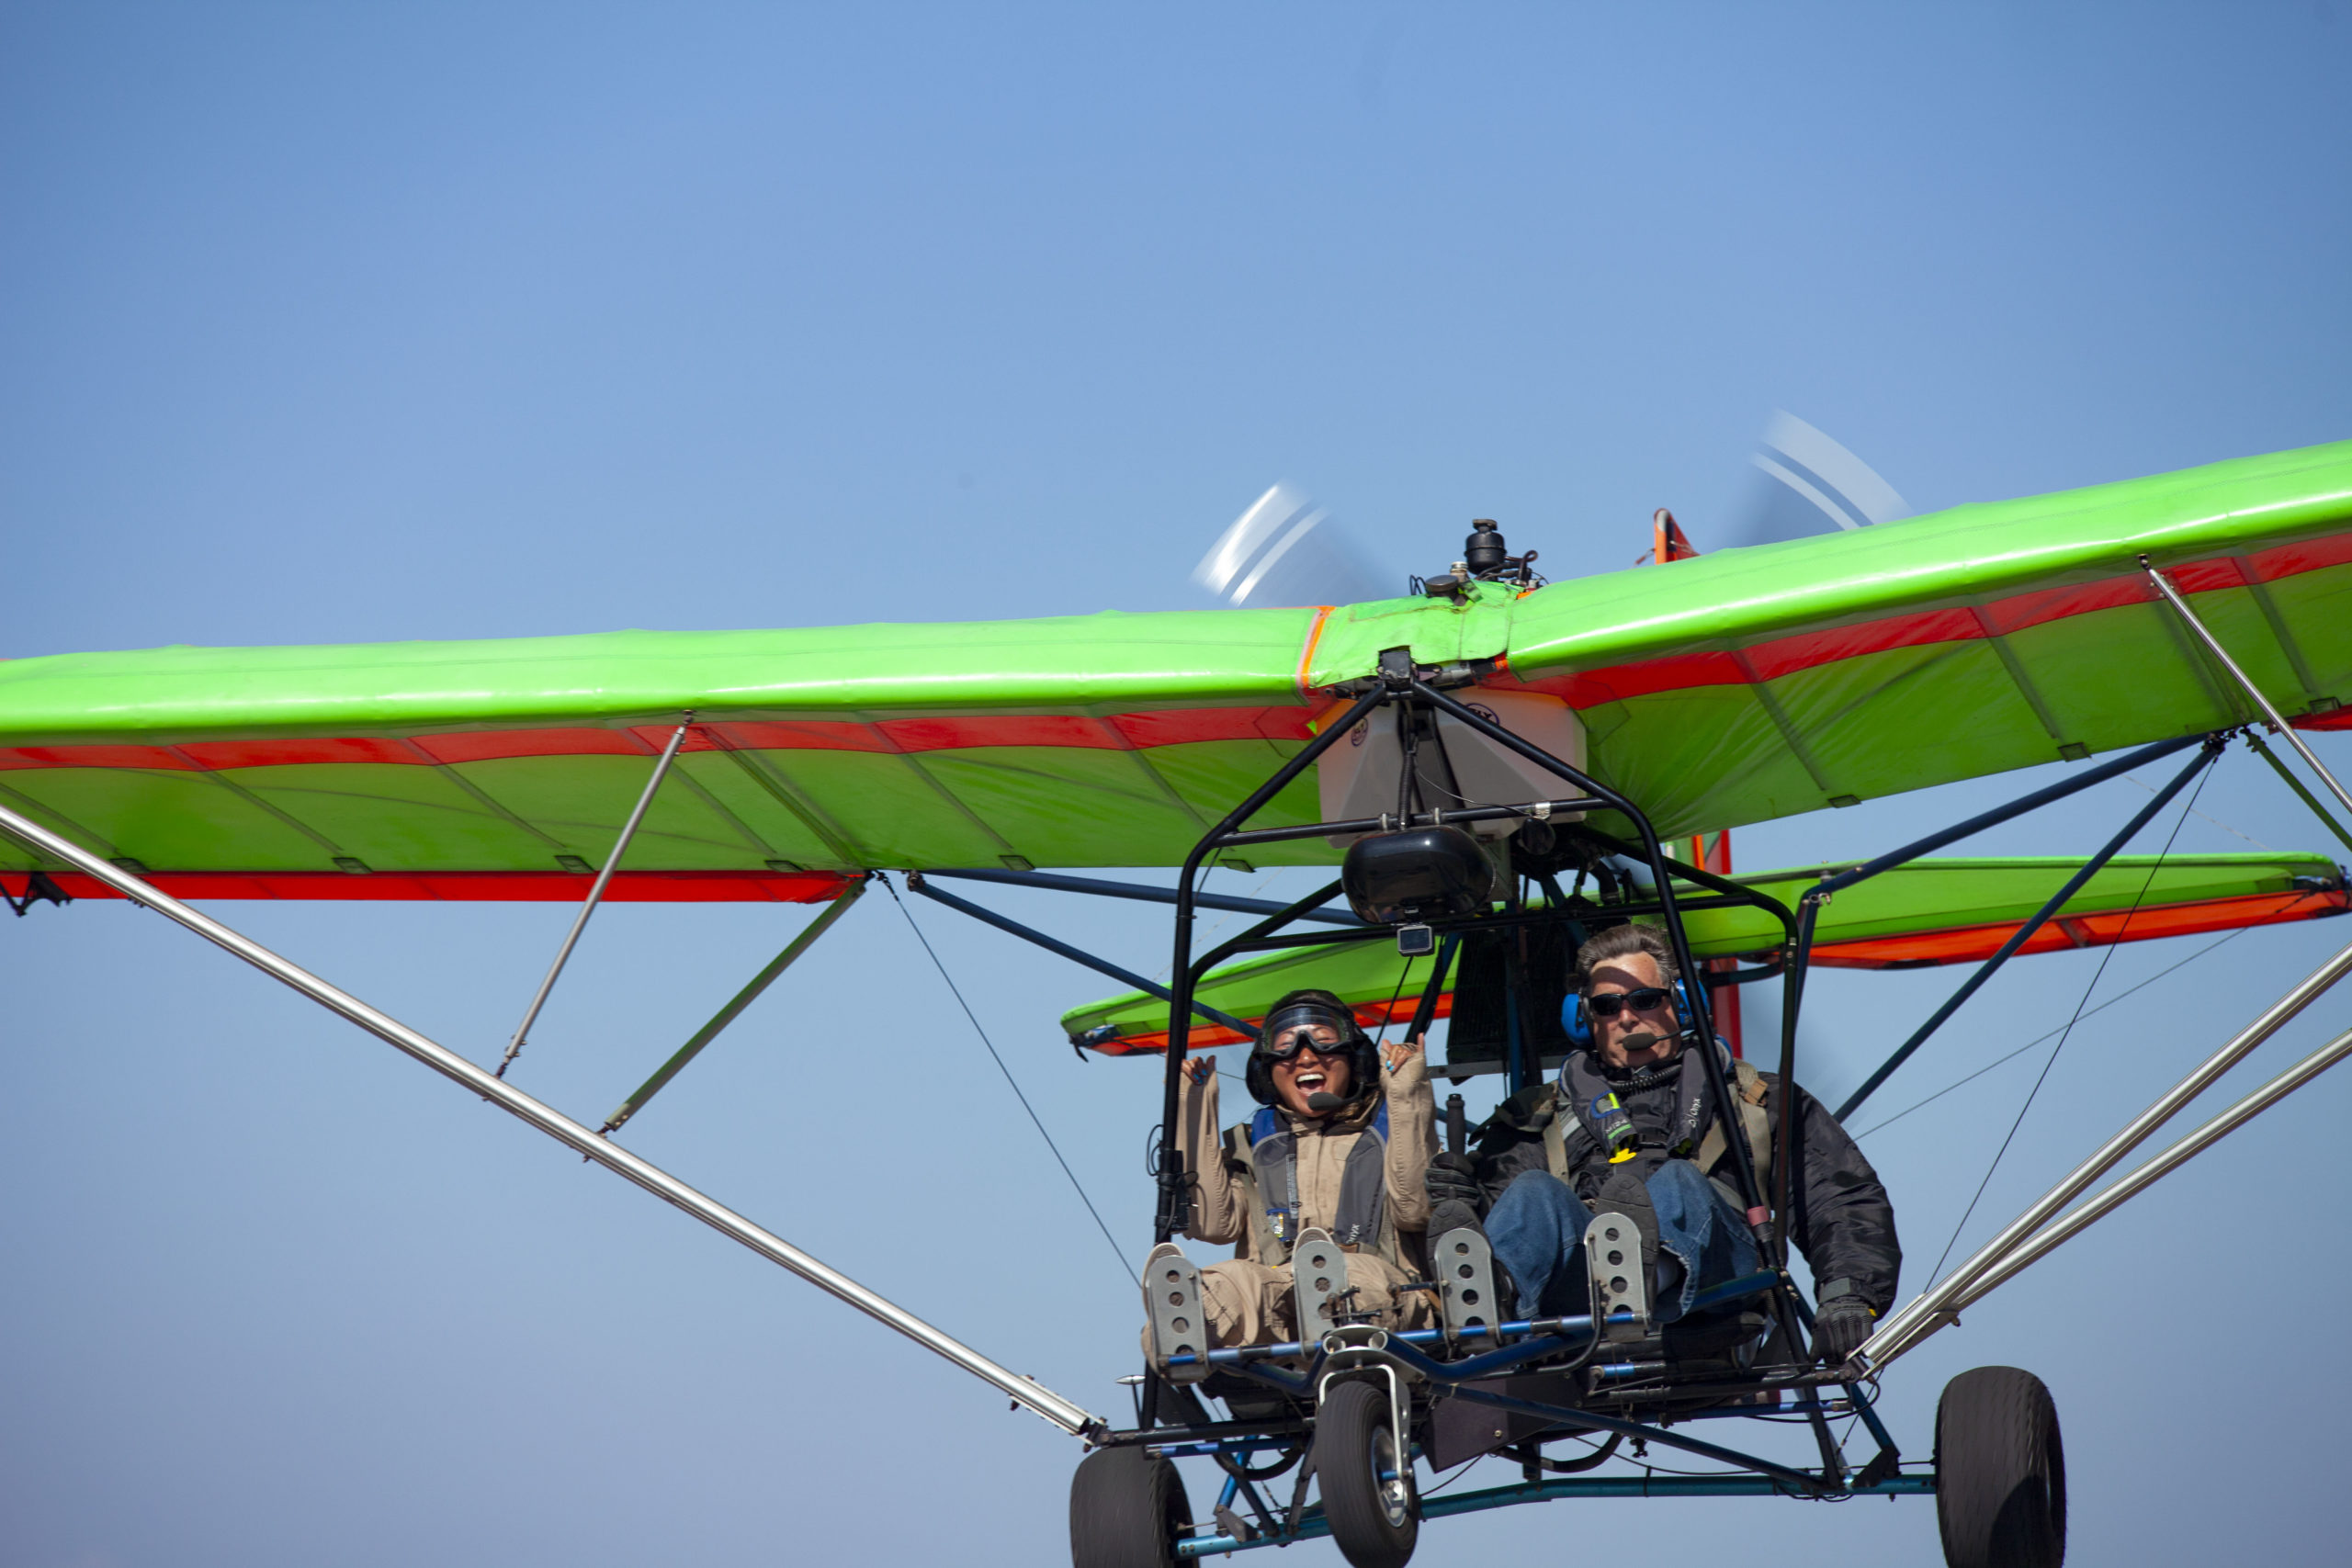 Get the thrill of a lifetime with Skyrider Ultralights - Visit Camarillo